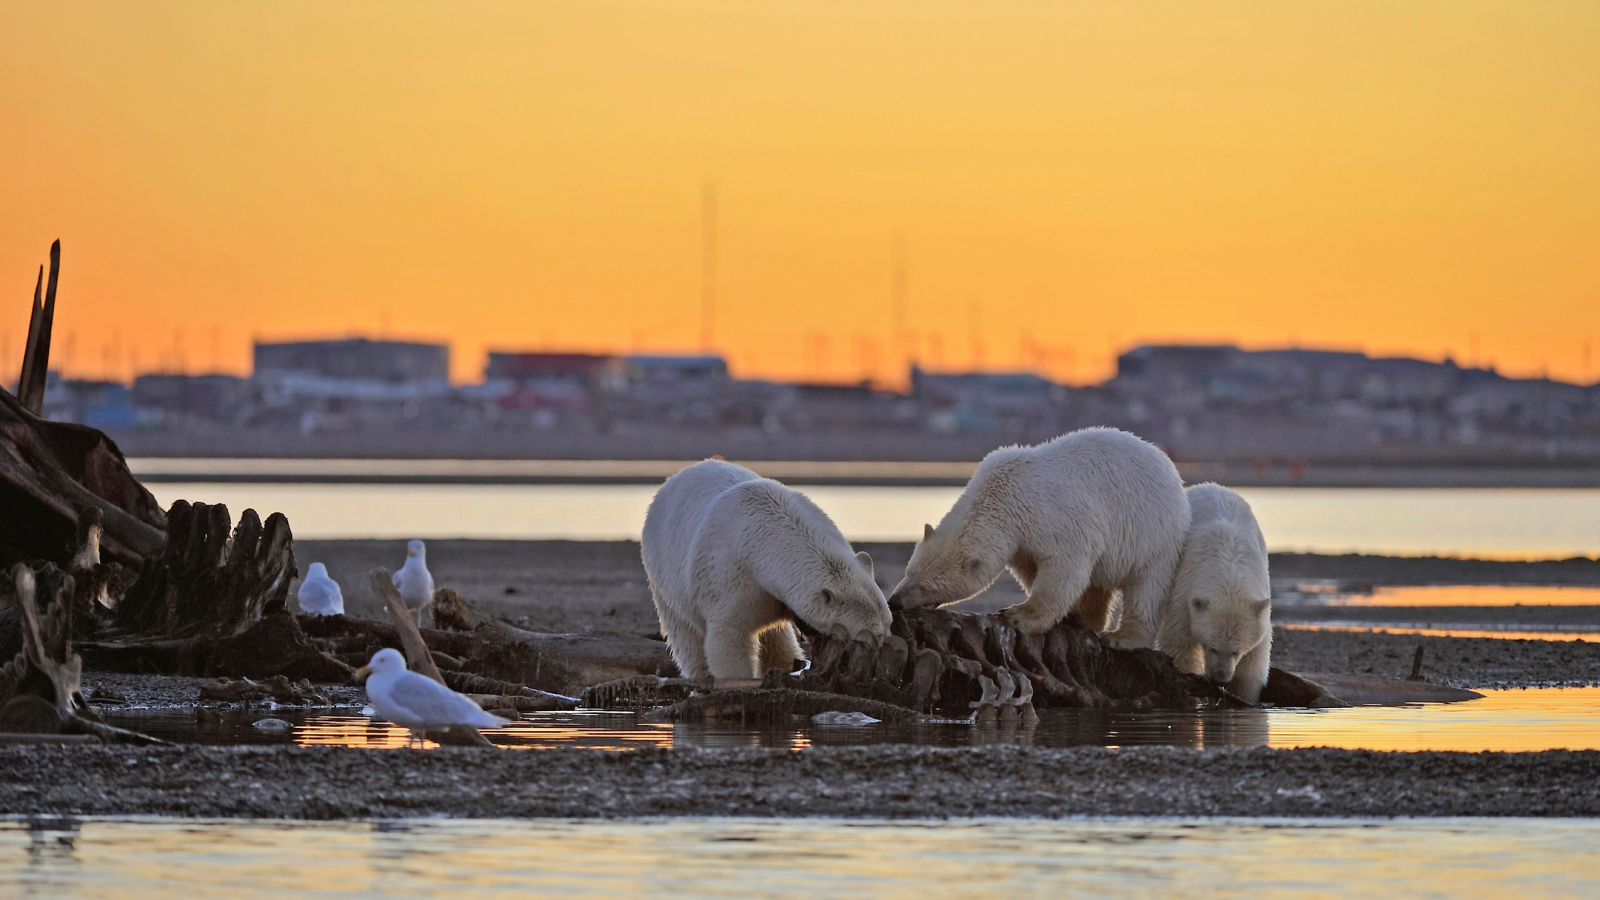 When polar bears hunt snow geese, hunger justifies the means